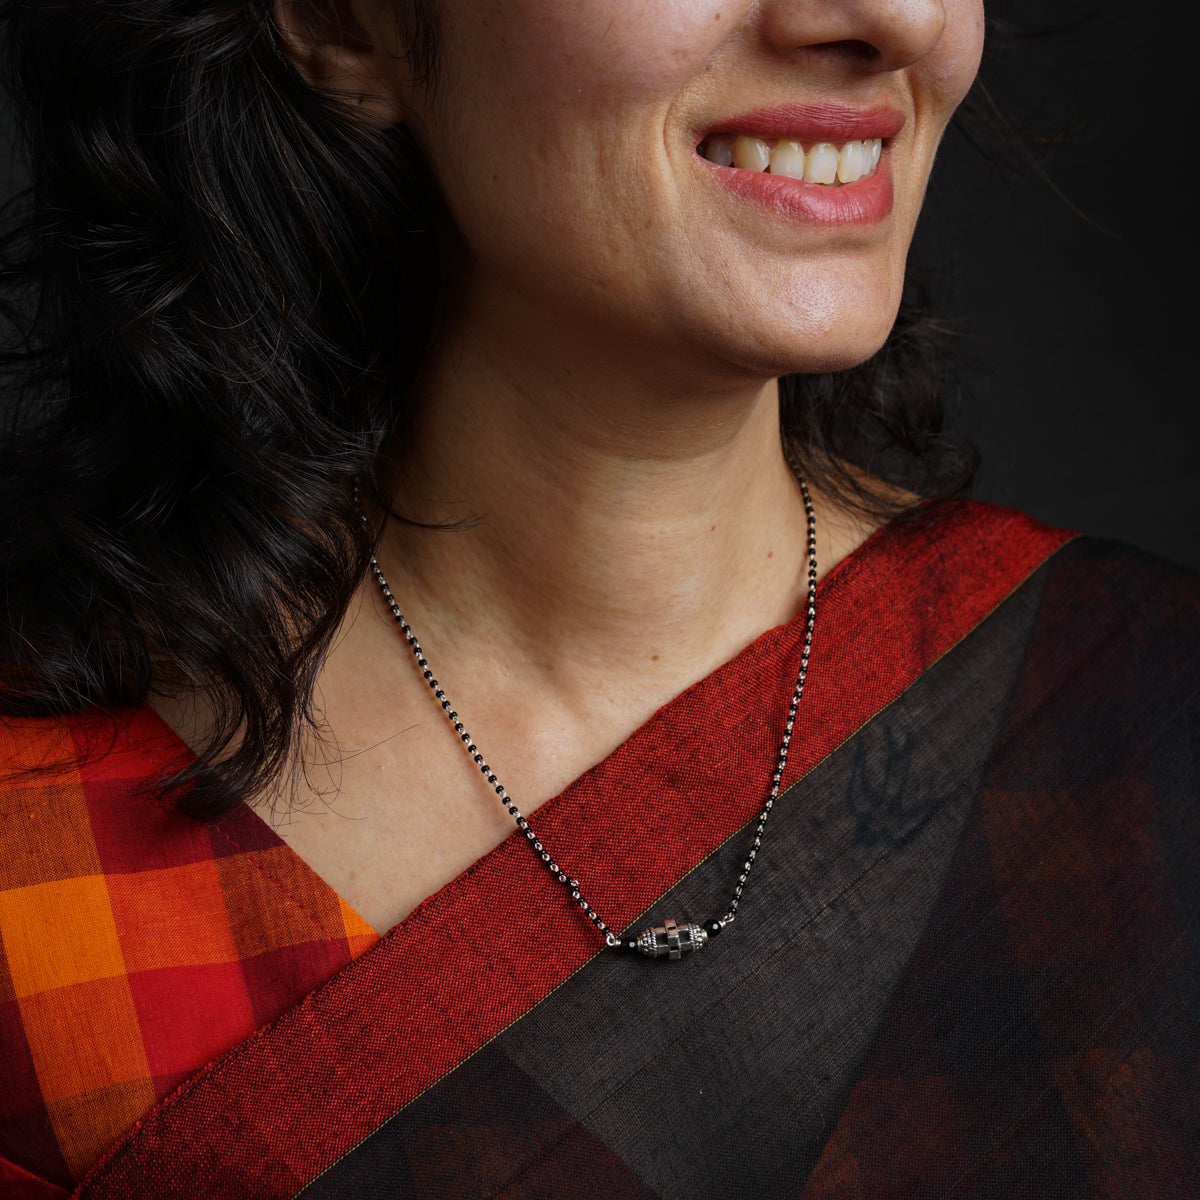 a woman wearing a red and black shirt and a necklace